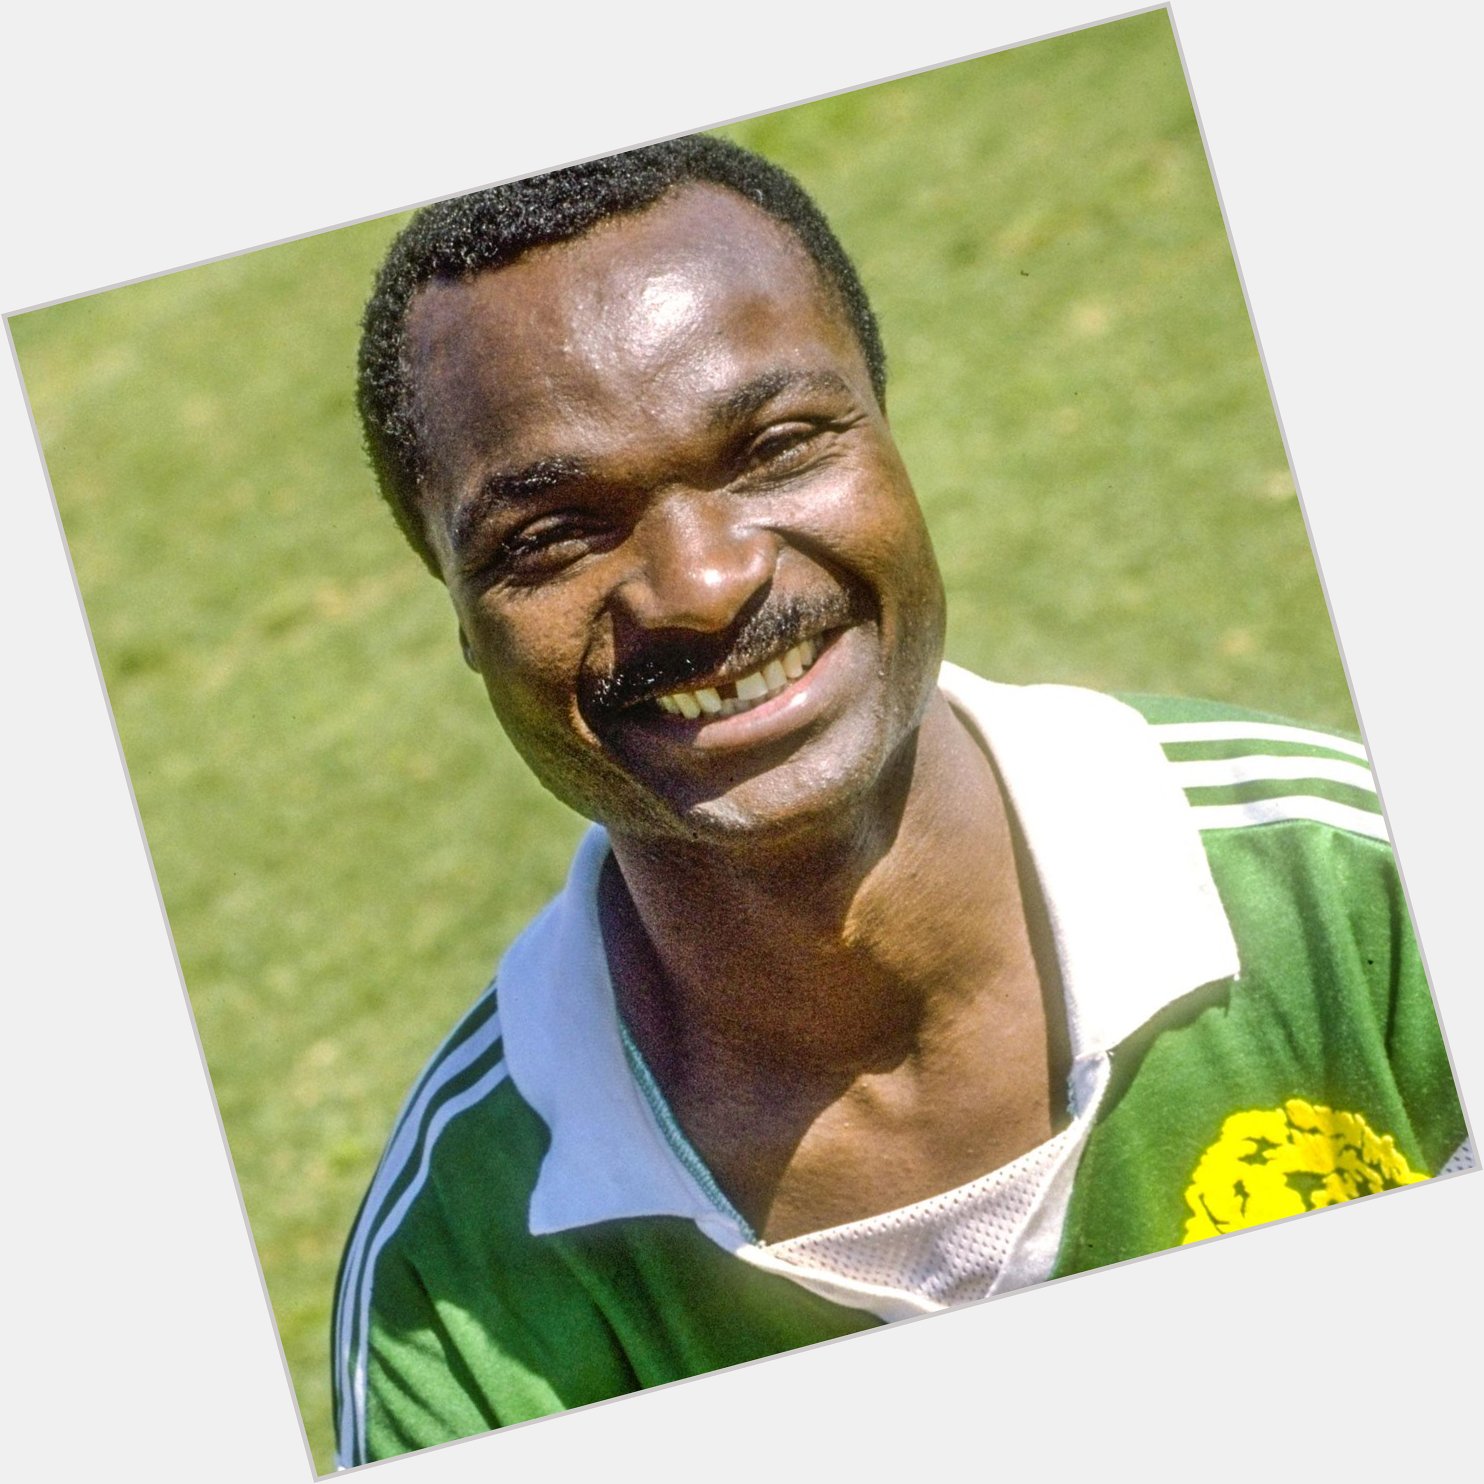 Happy birthday to a Cameroonian World Cup legend! 

Roger Milla is 63 today 